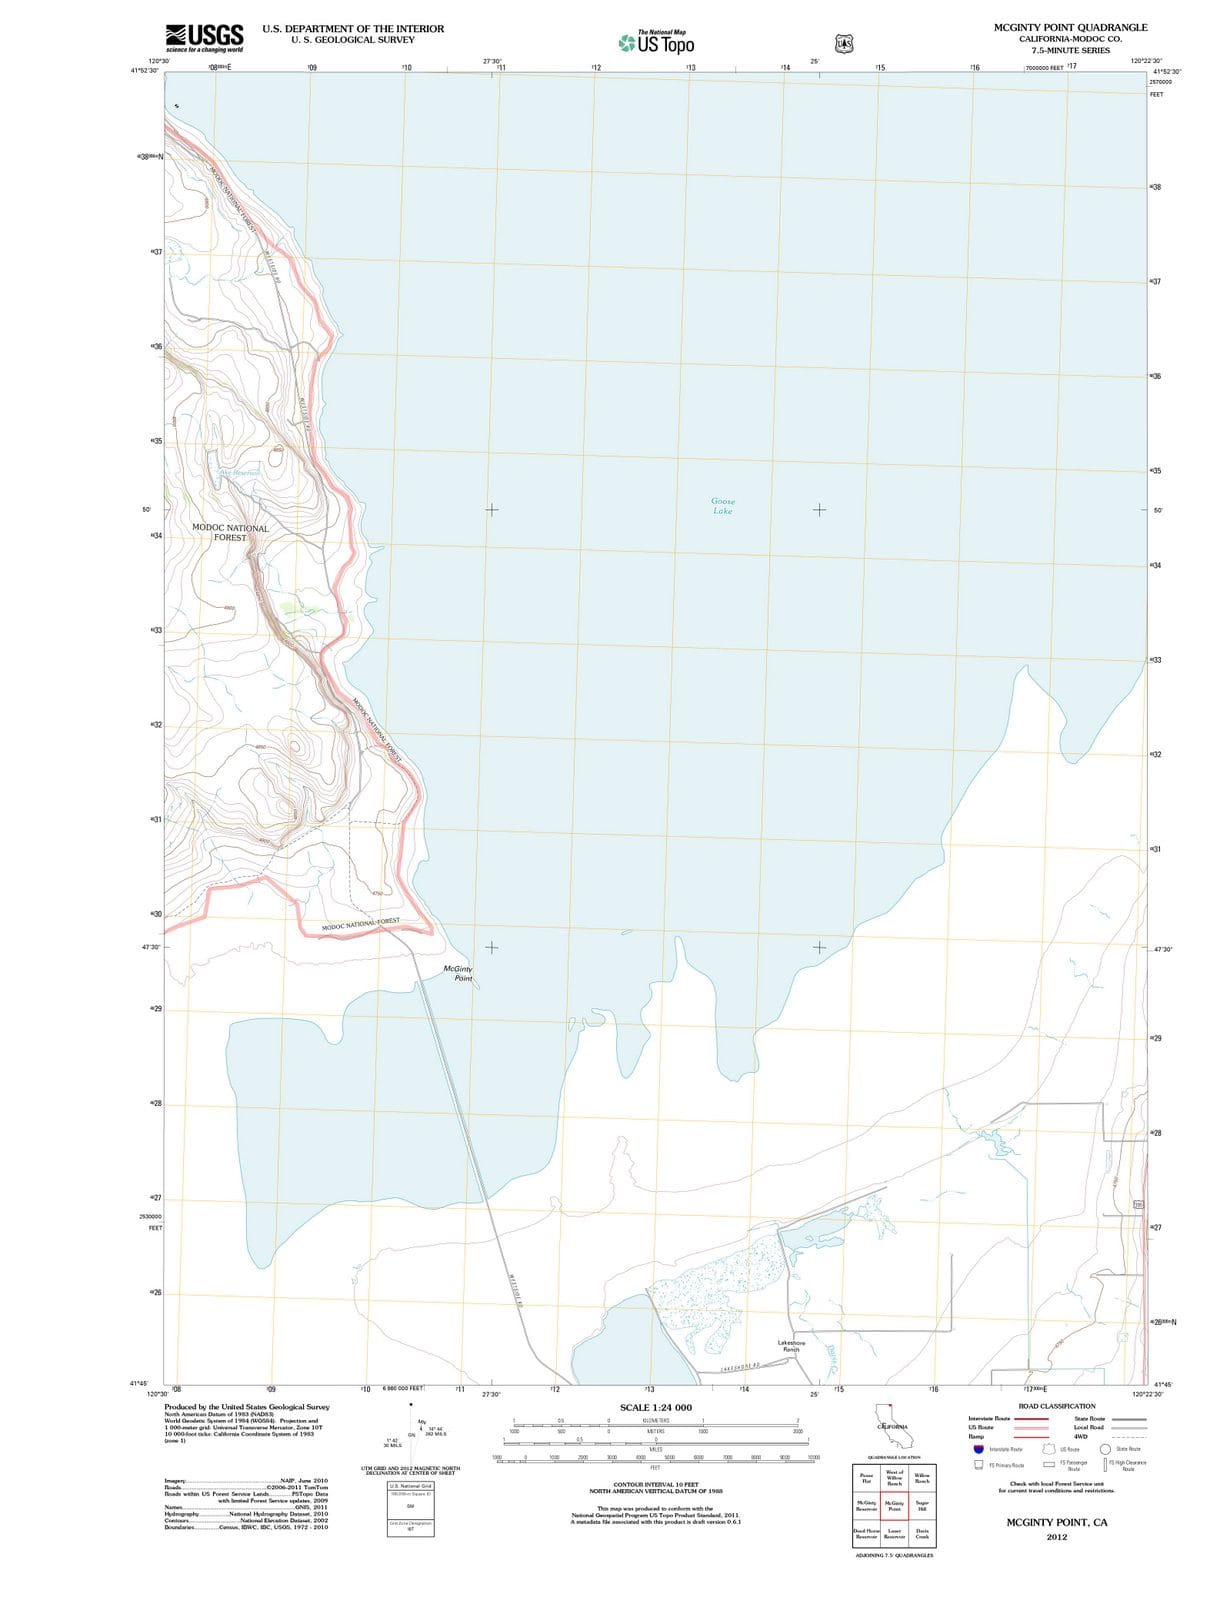 2012 McGinty Point, CA - California - USGS Topographic Map